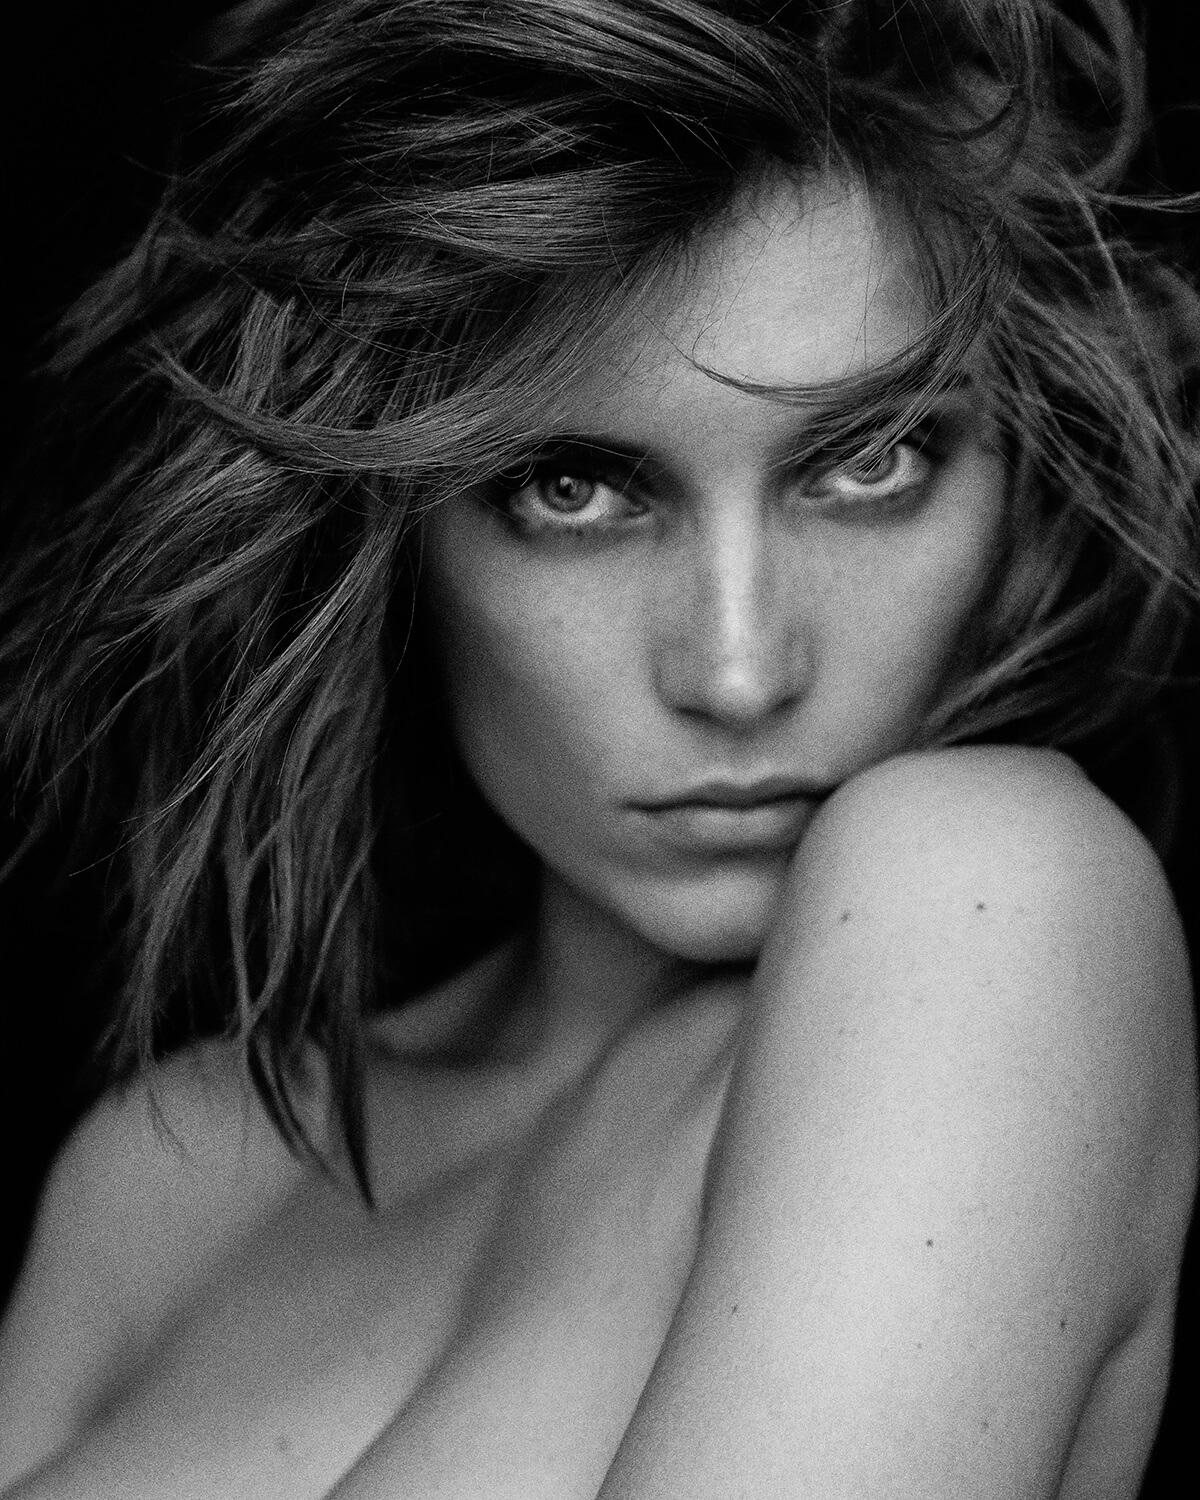 Black and white headshot of a topless woman with brown hair and natural make-up